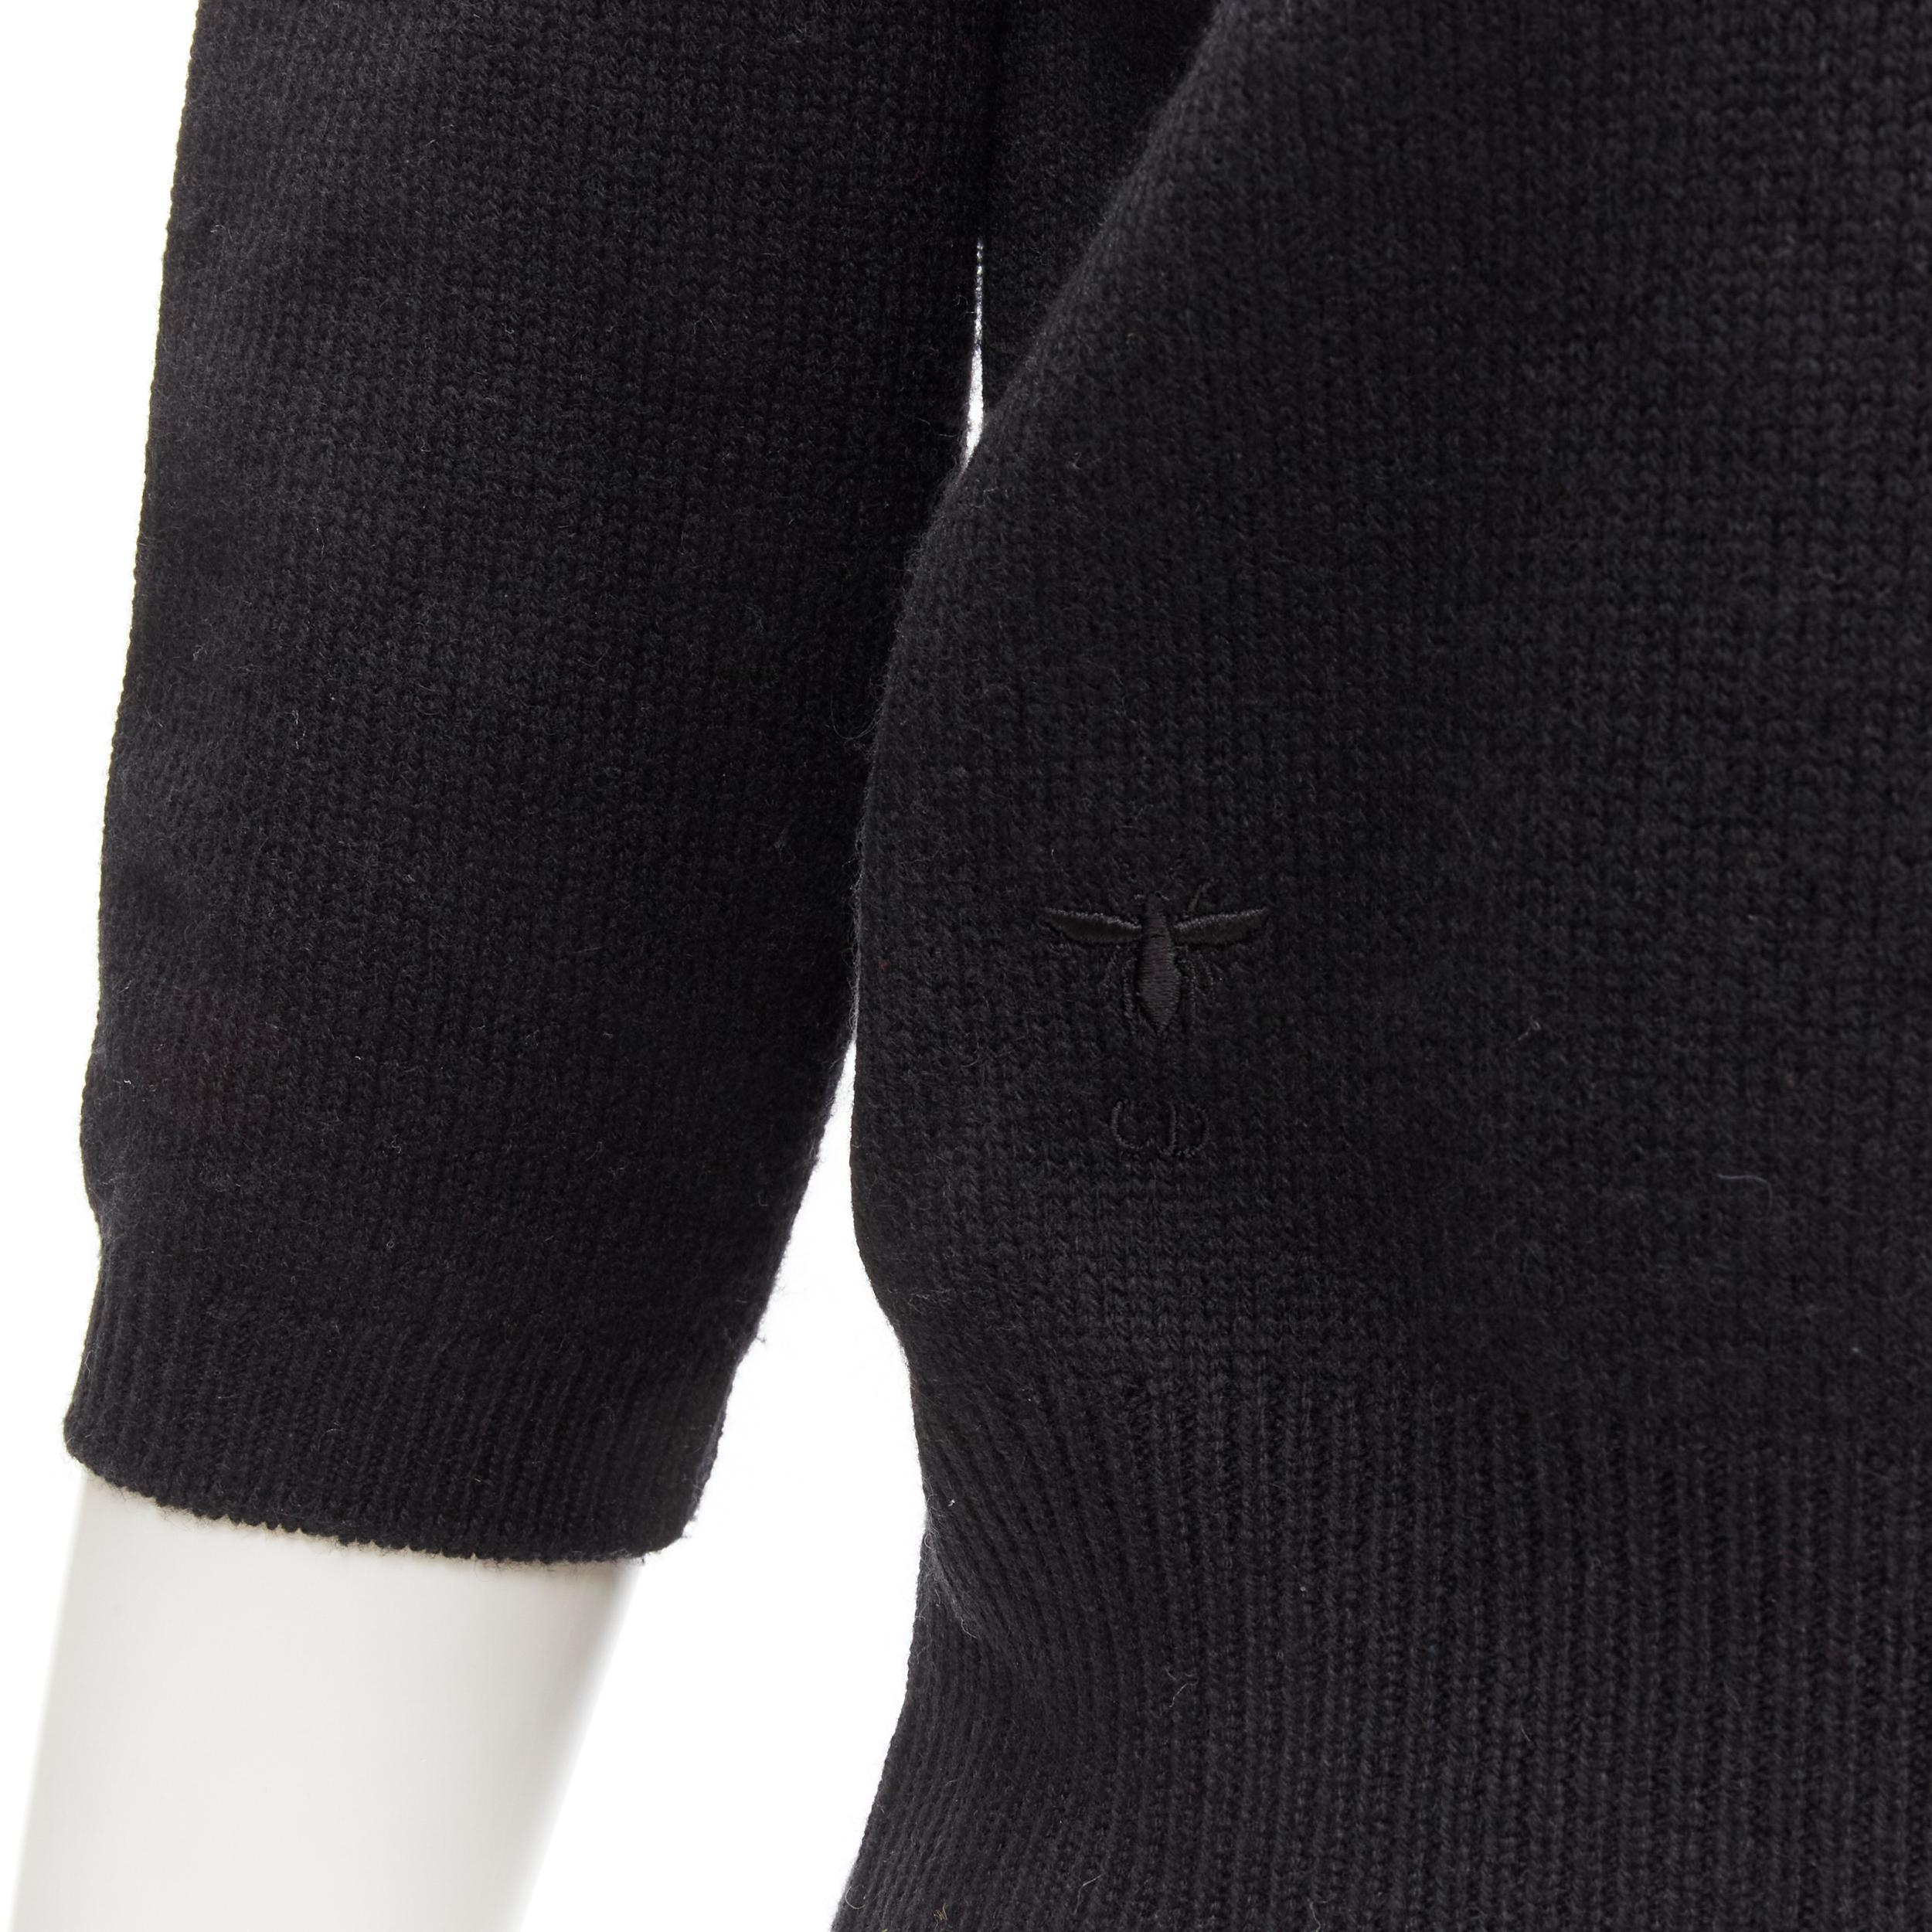 CHRISTIAN DIOR 100% cashmere black polo collar Bee embroidery sweater top FR42 L
Brand: Dior
Material: Cashmere
Color: Black
Pattern: Solid
Extra Detail: Polo button collar. Bee embroidery at front hem.
Made in: Italy

CONDITION:
Condition: